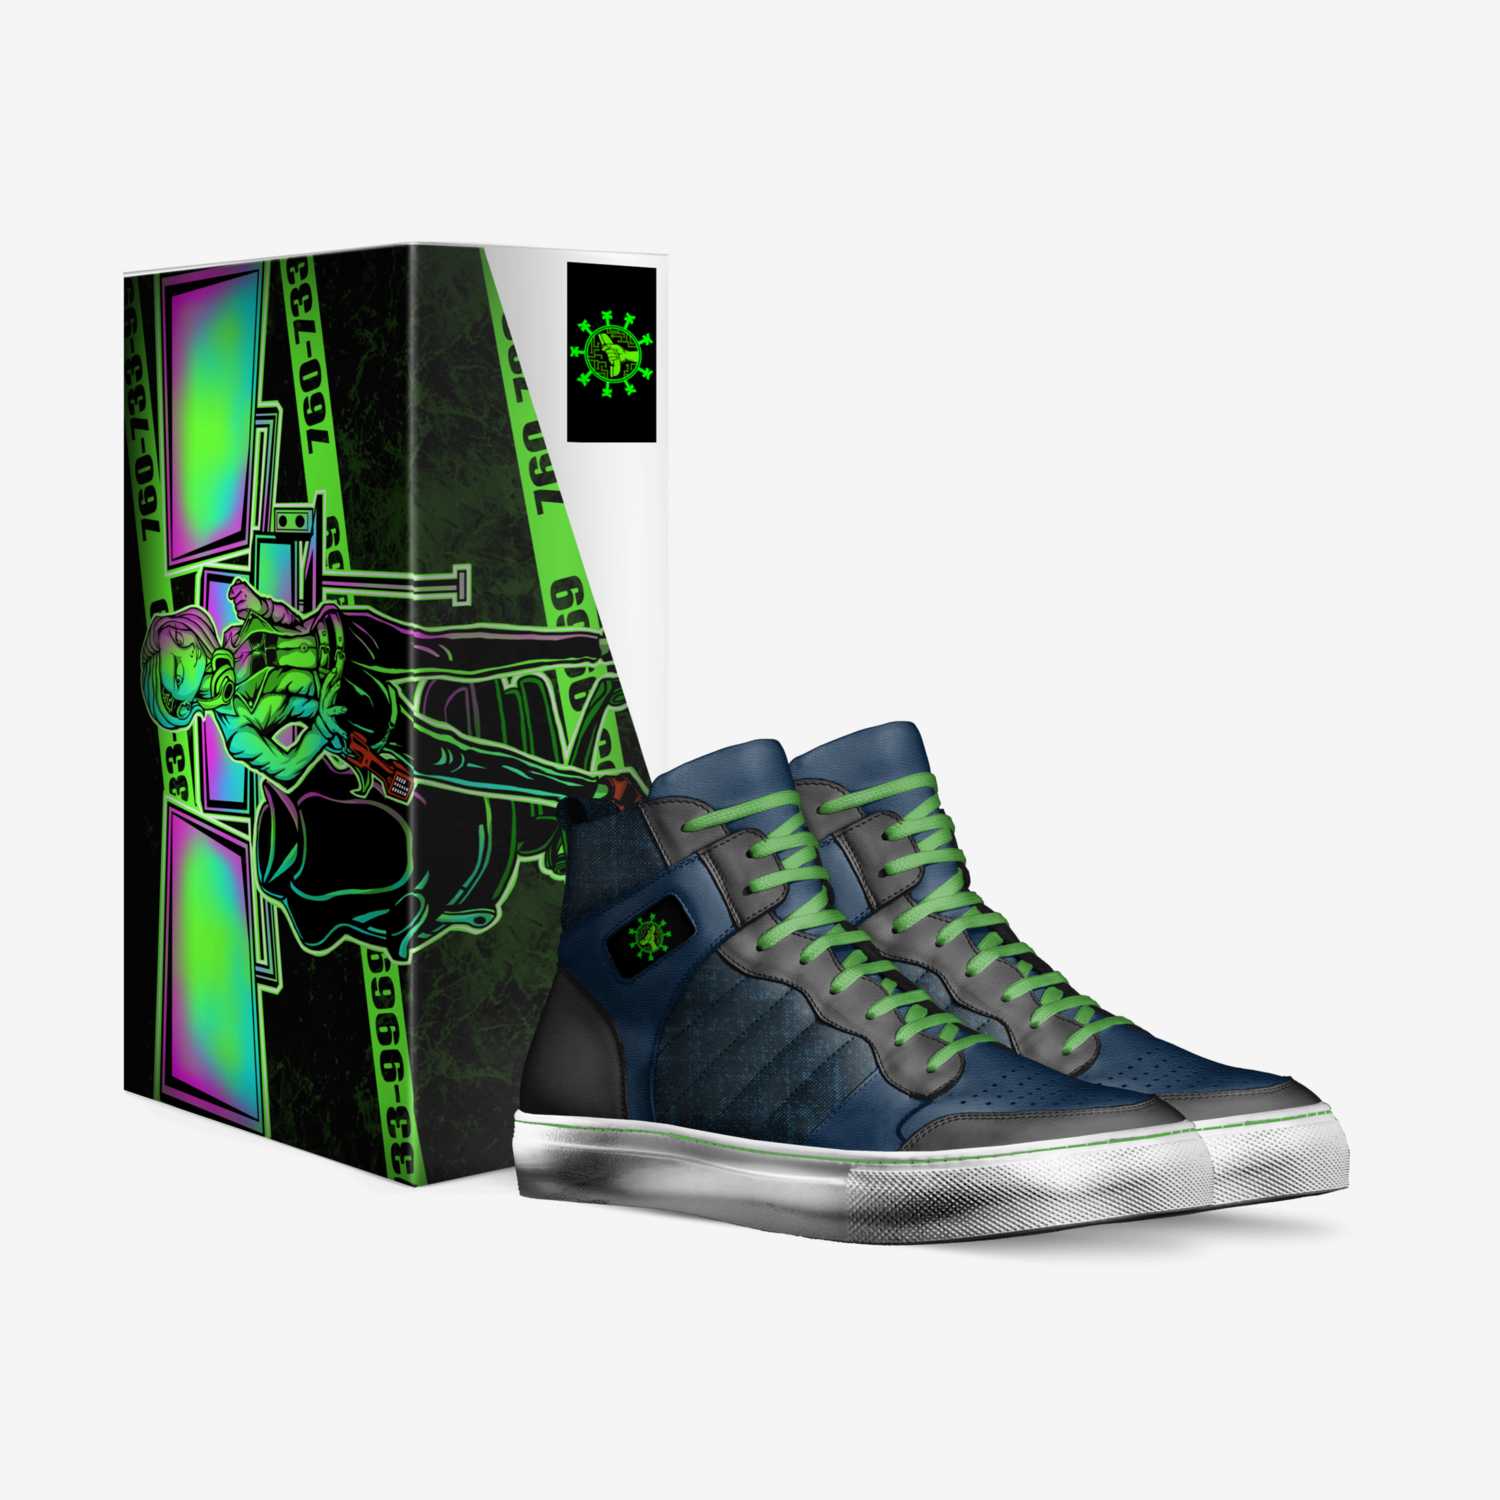 Phreaker Sneaker custom made in Italy shoes by Kat Valentine | Box view